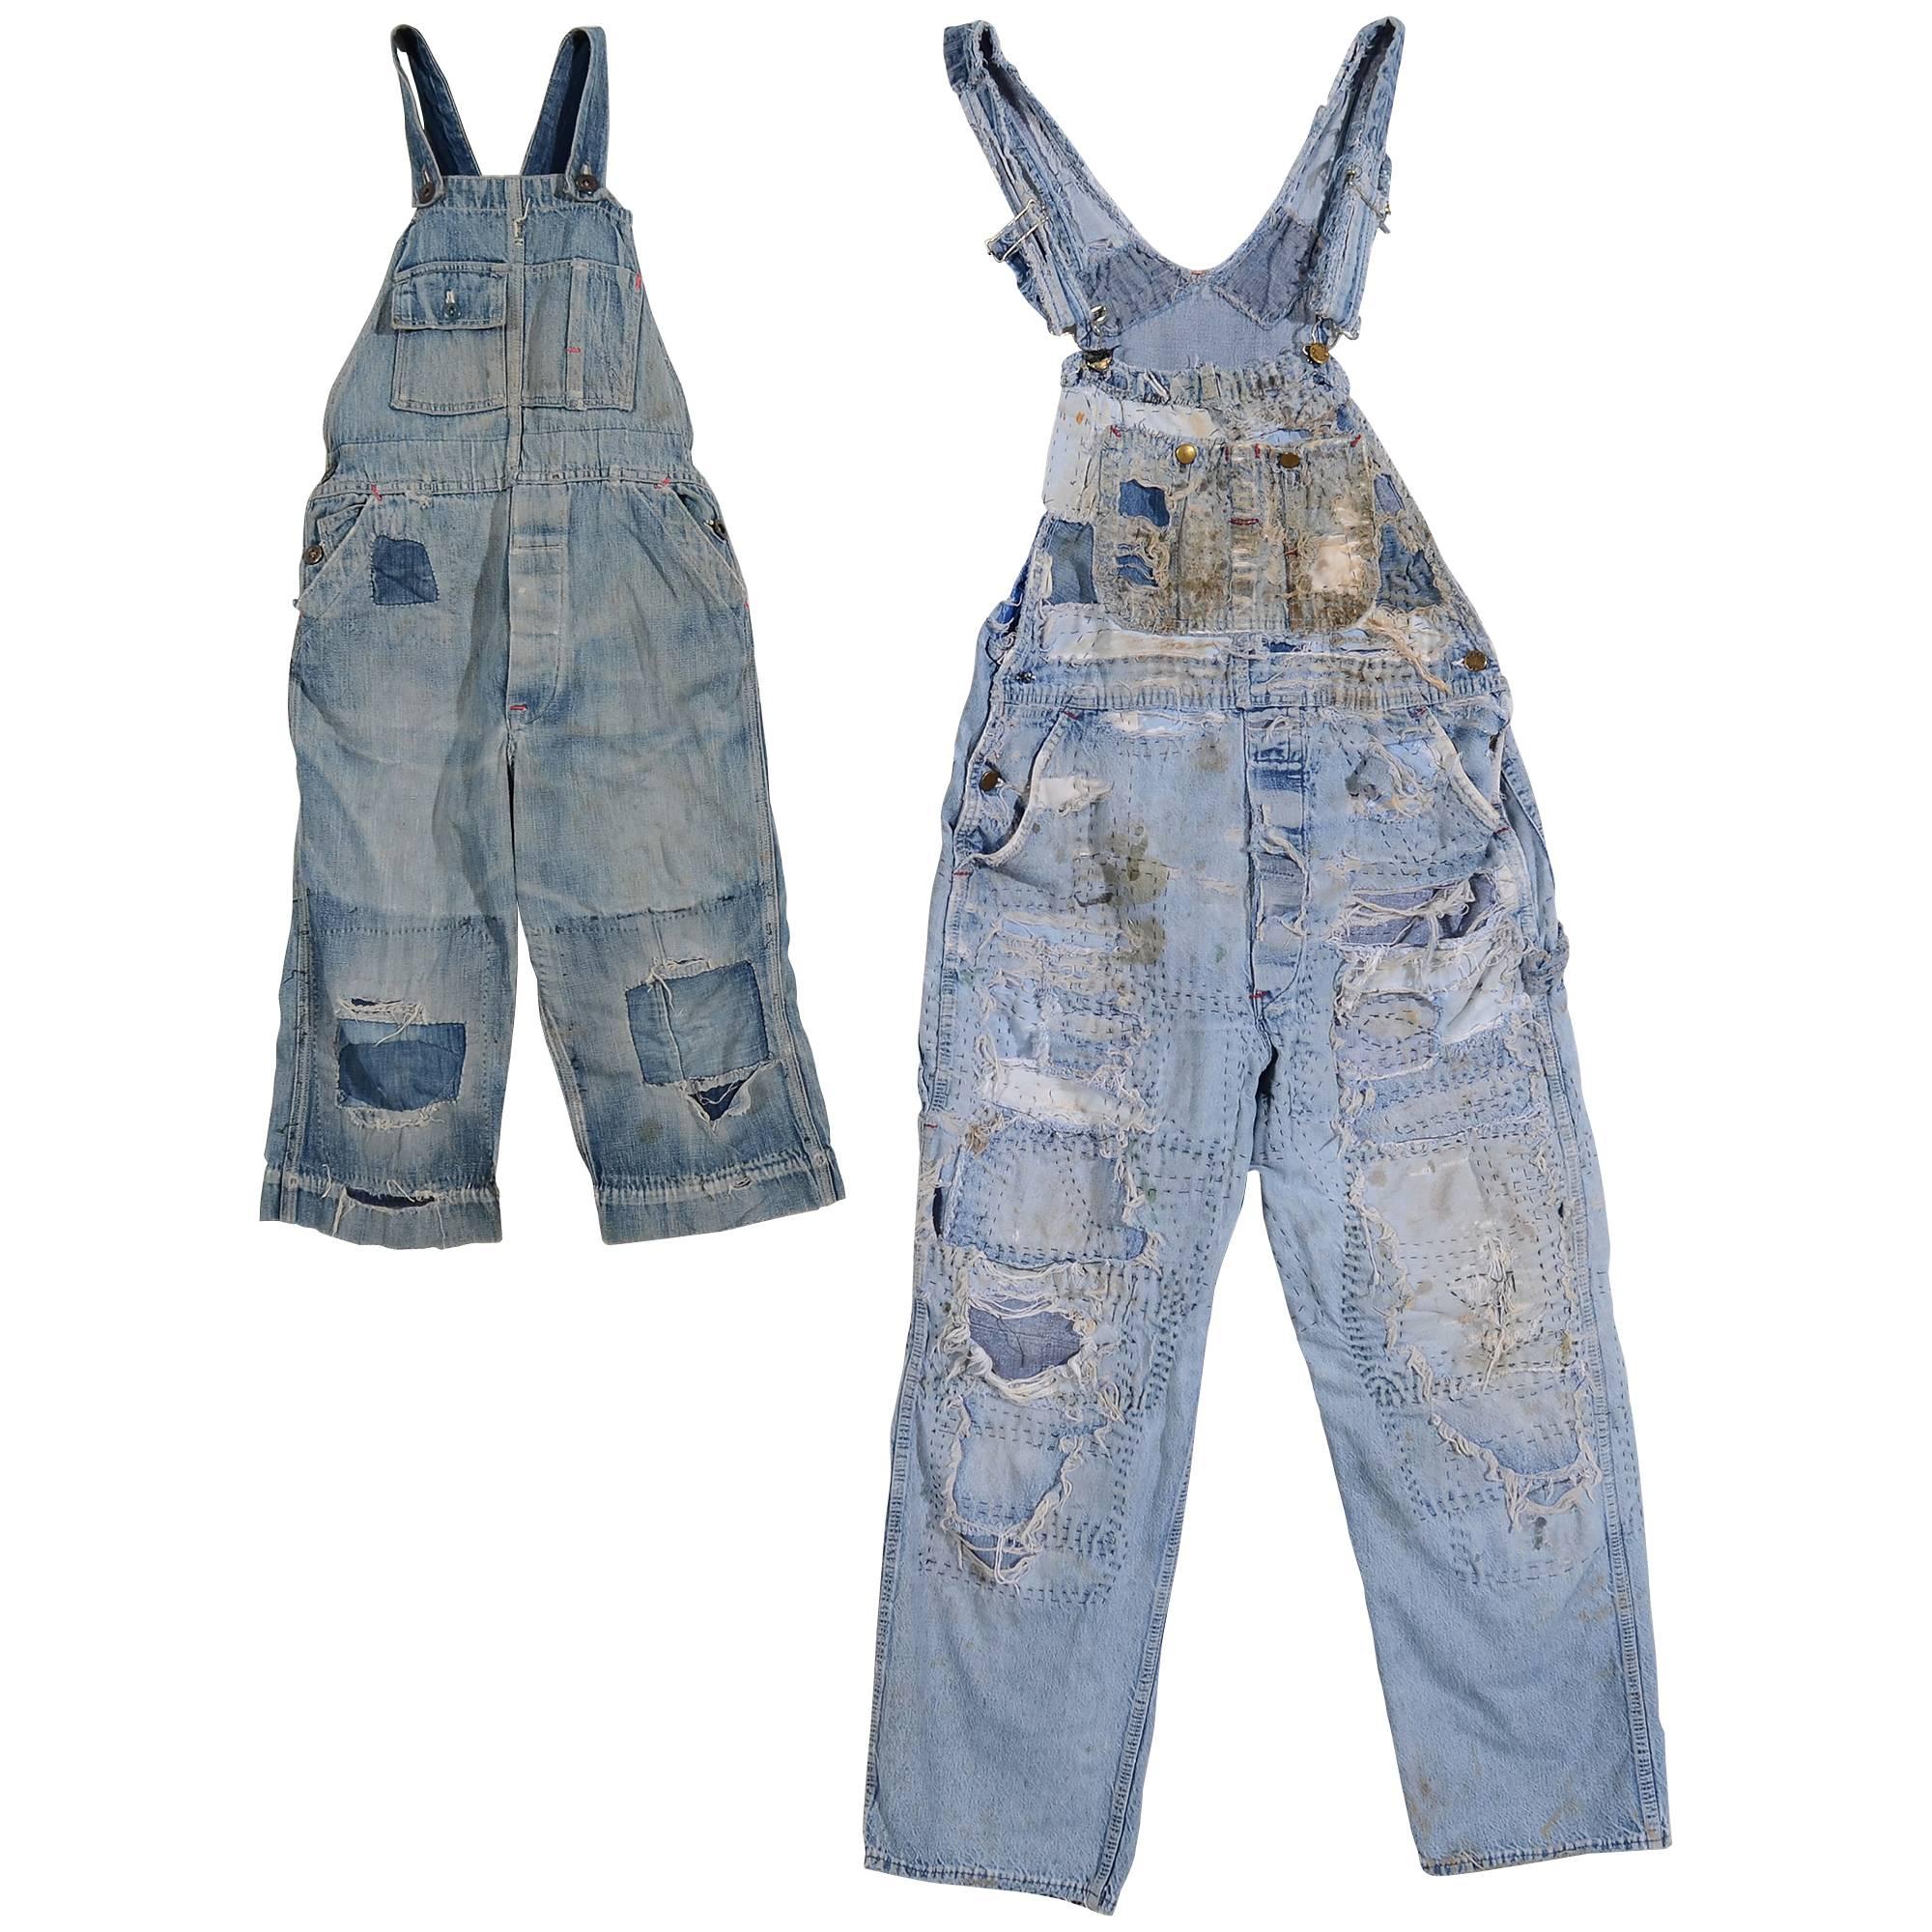 Mended, Patched, Embroidered and Quilted Overalls